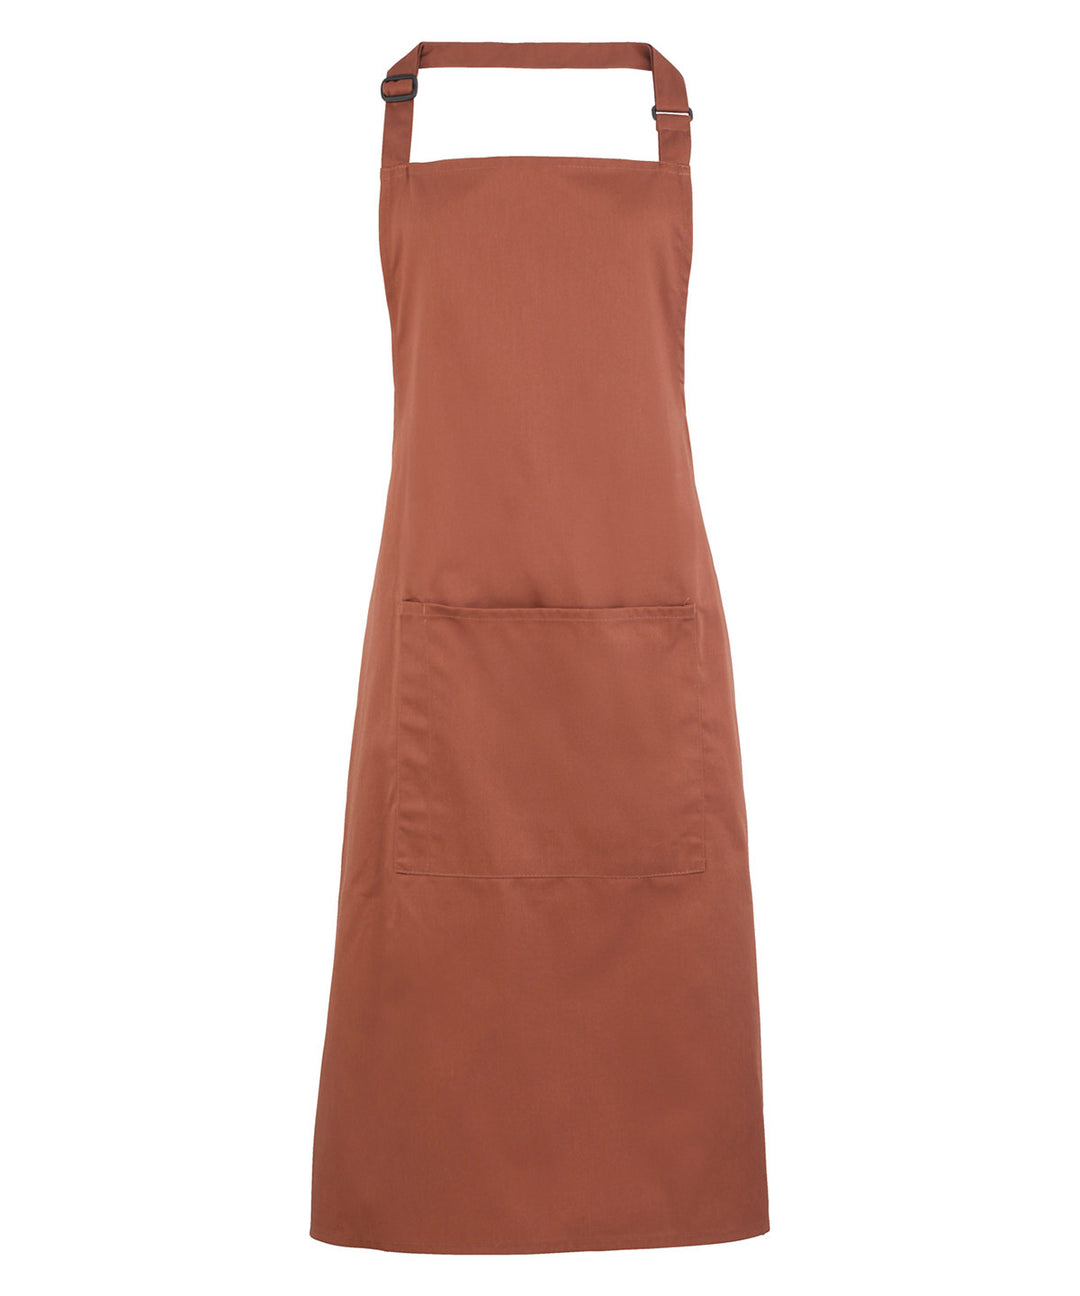 a brown apron on a white background